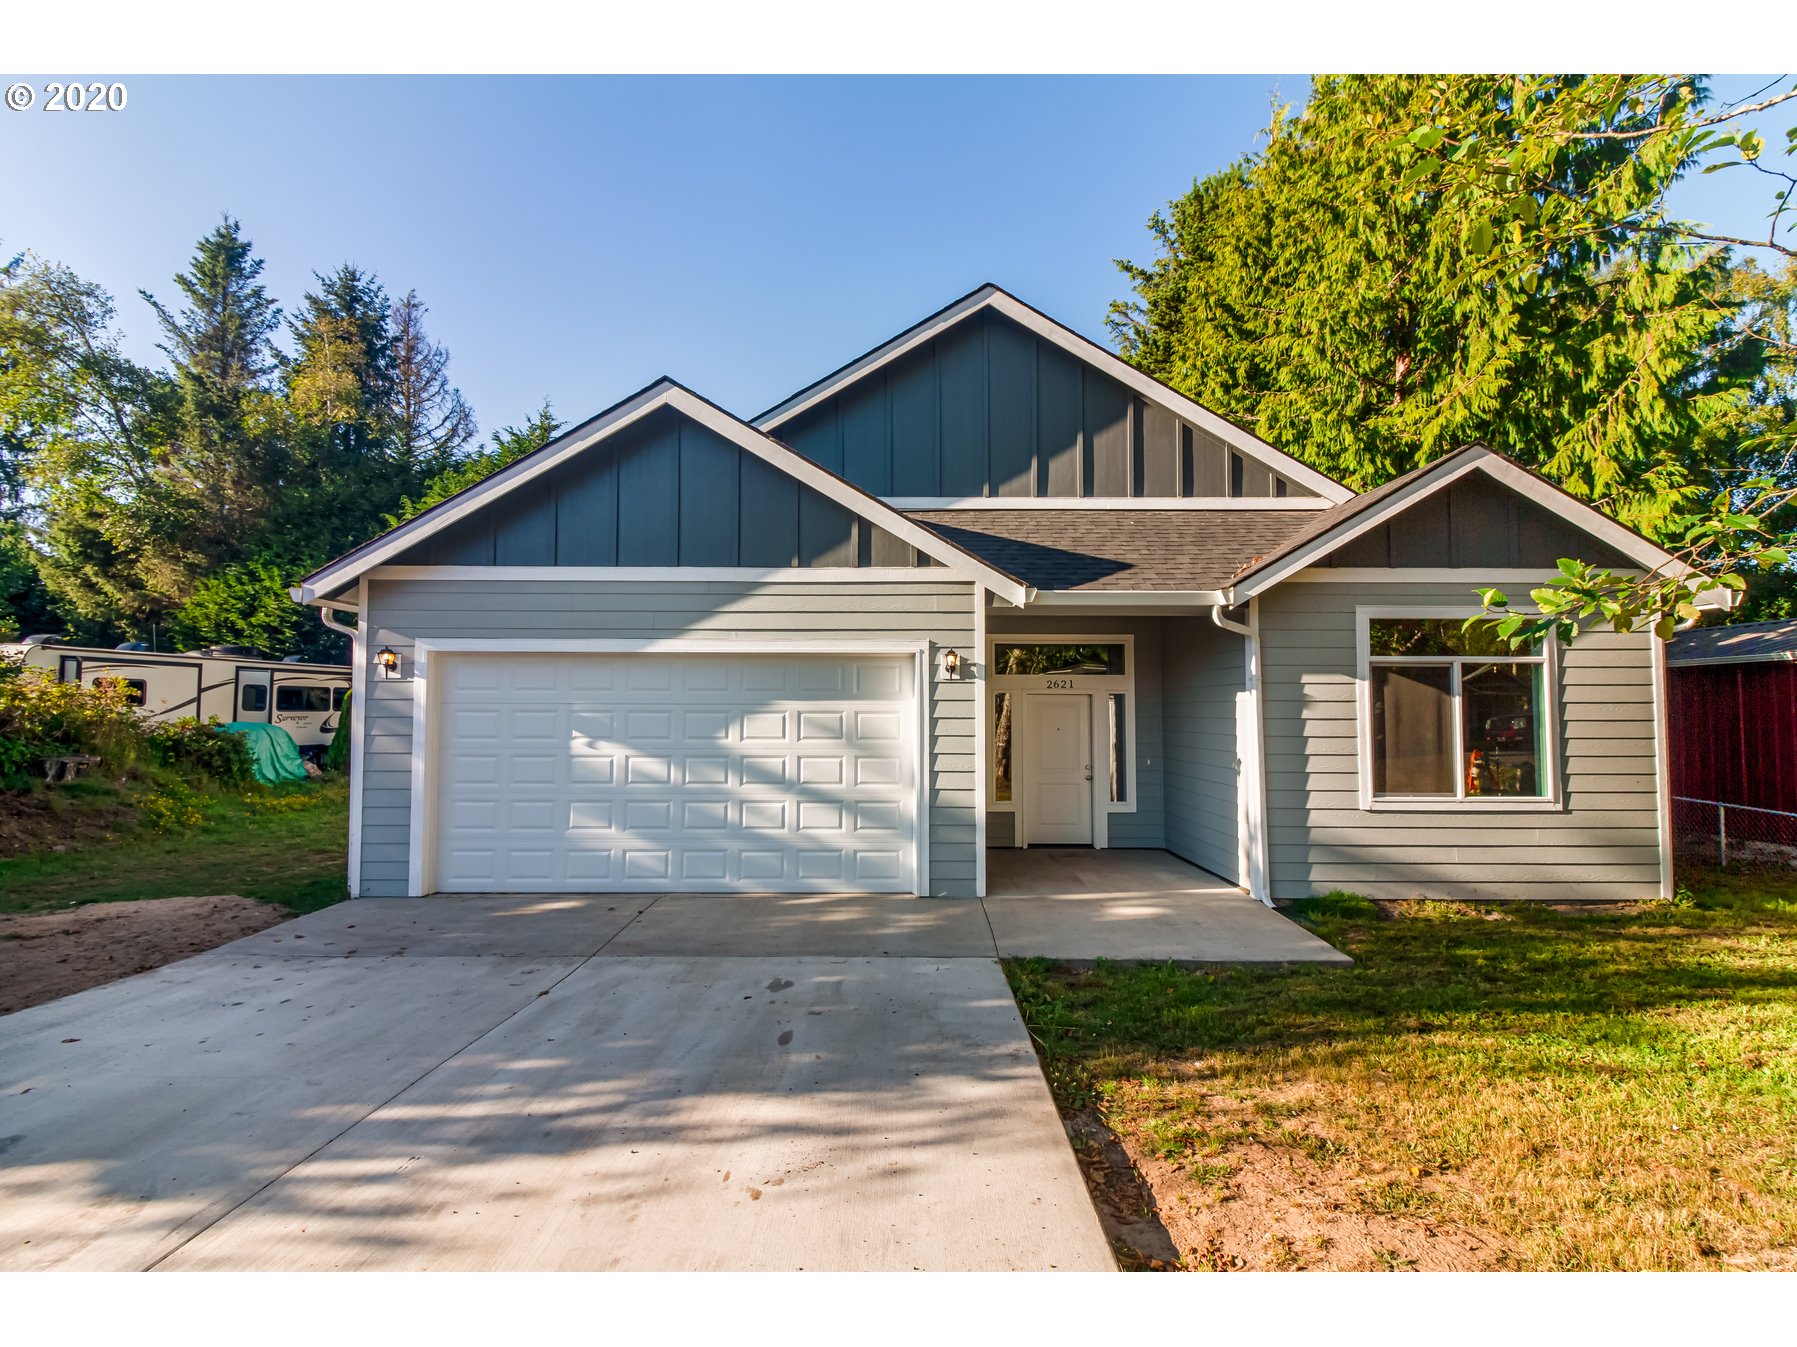 2621 240TH PL (1 of 20)